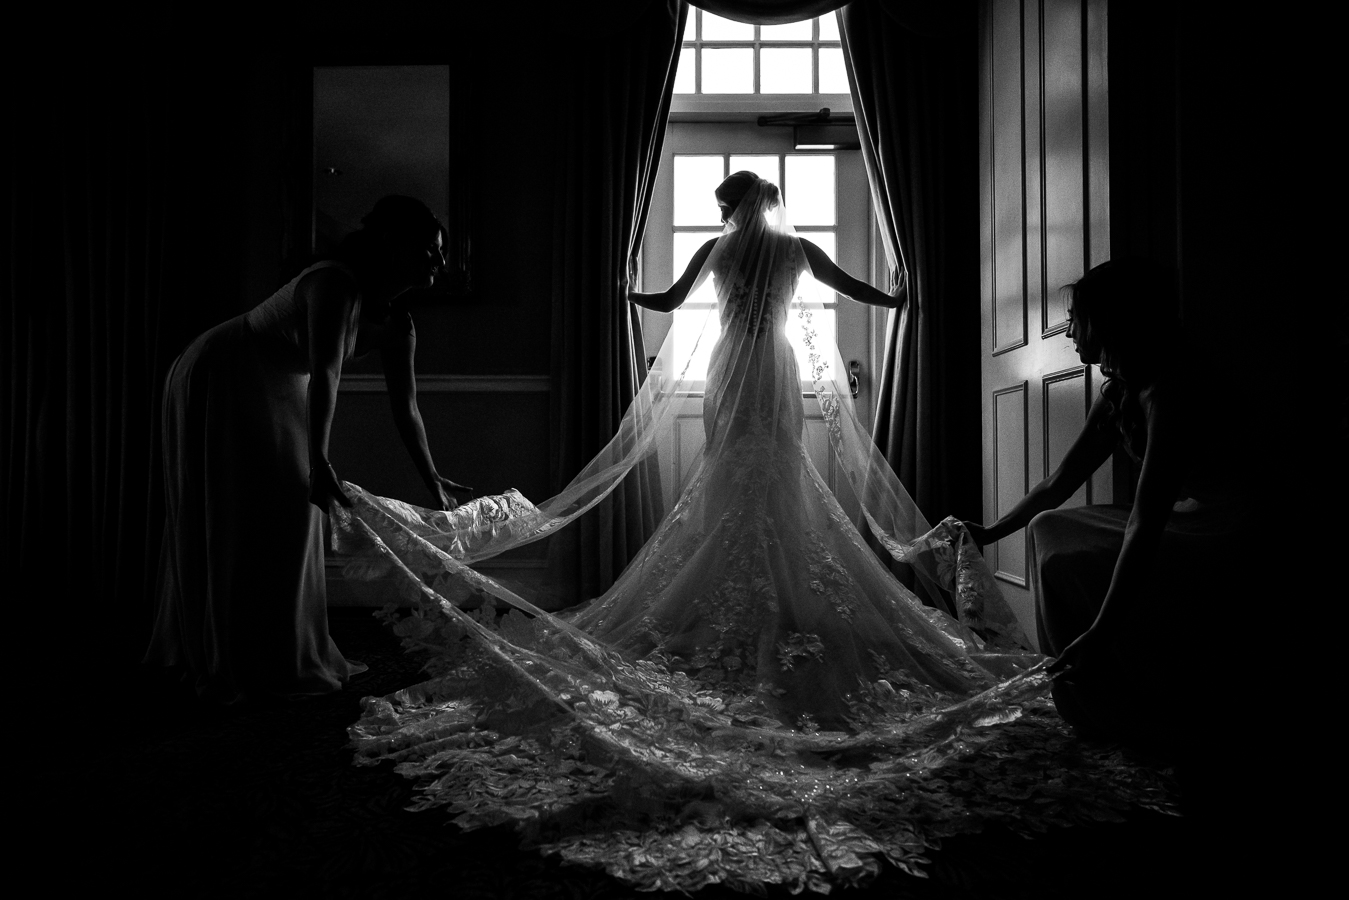 Country Club of York Wedding photographer, rhinehart photography, captures this stunning black and white image of the bride as she stands in the window while her bridesmaids fix her dress